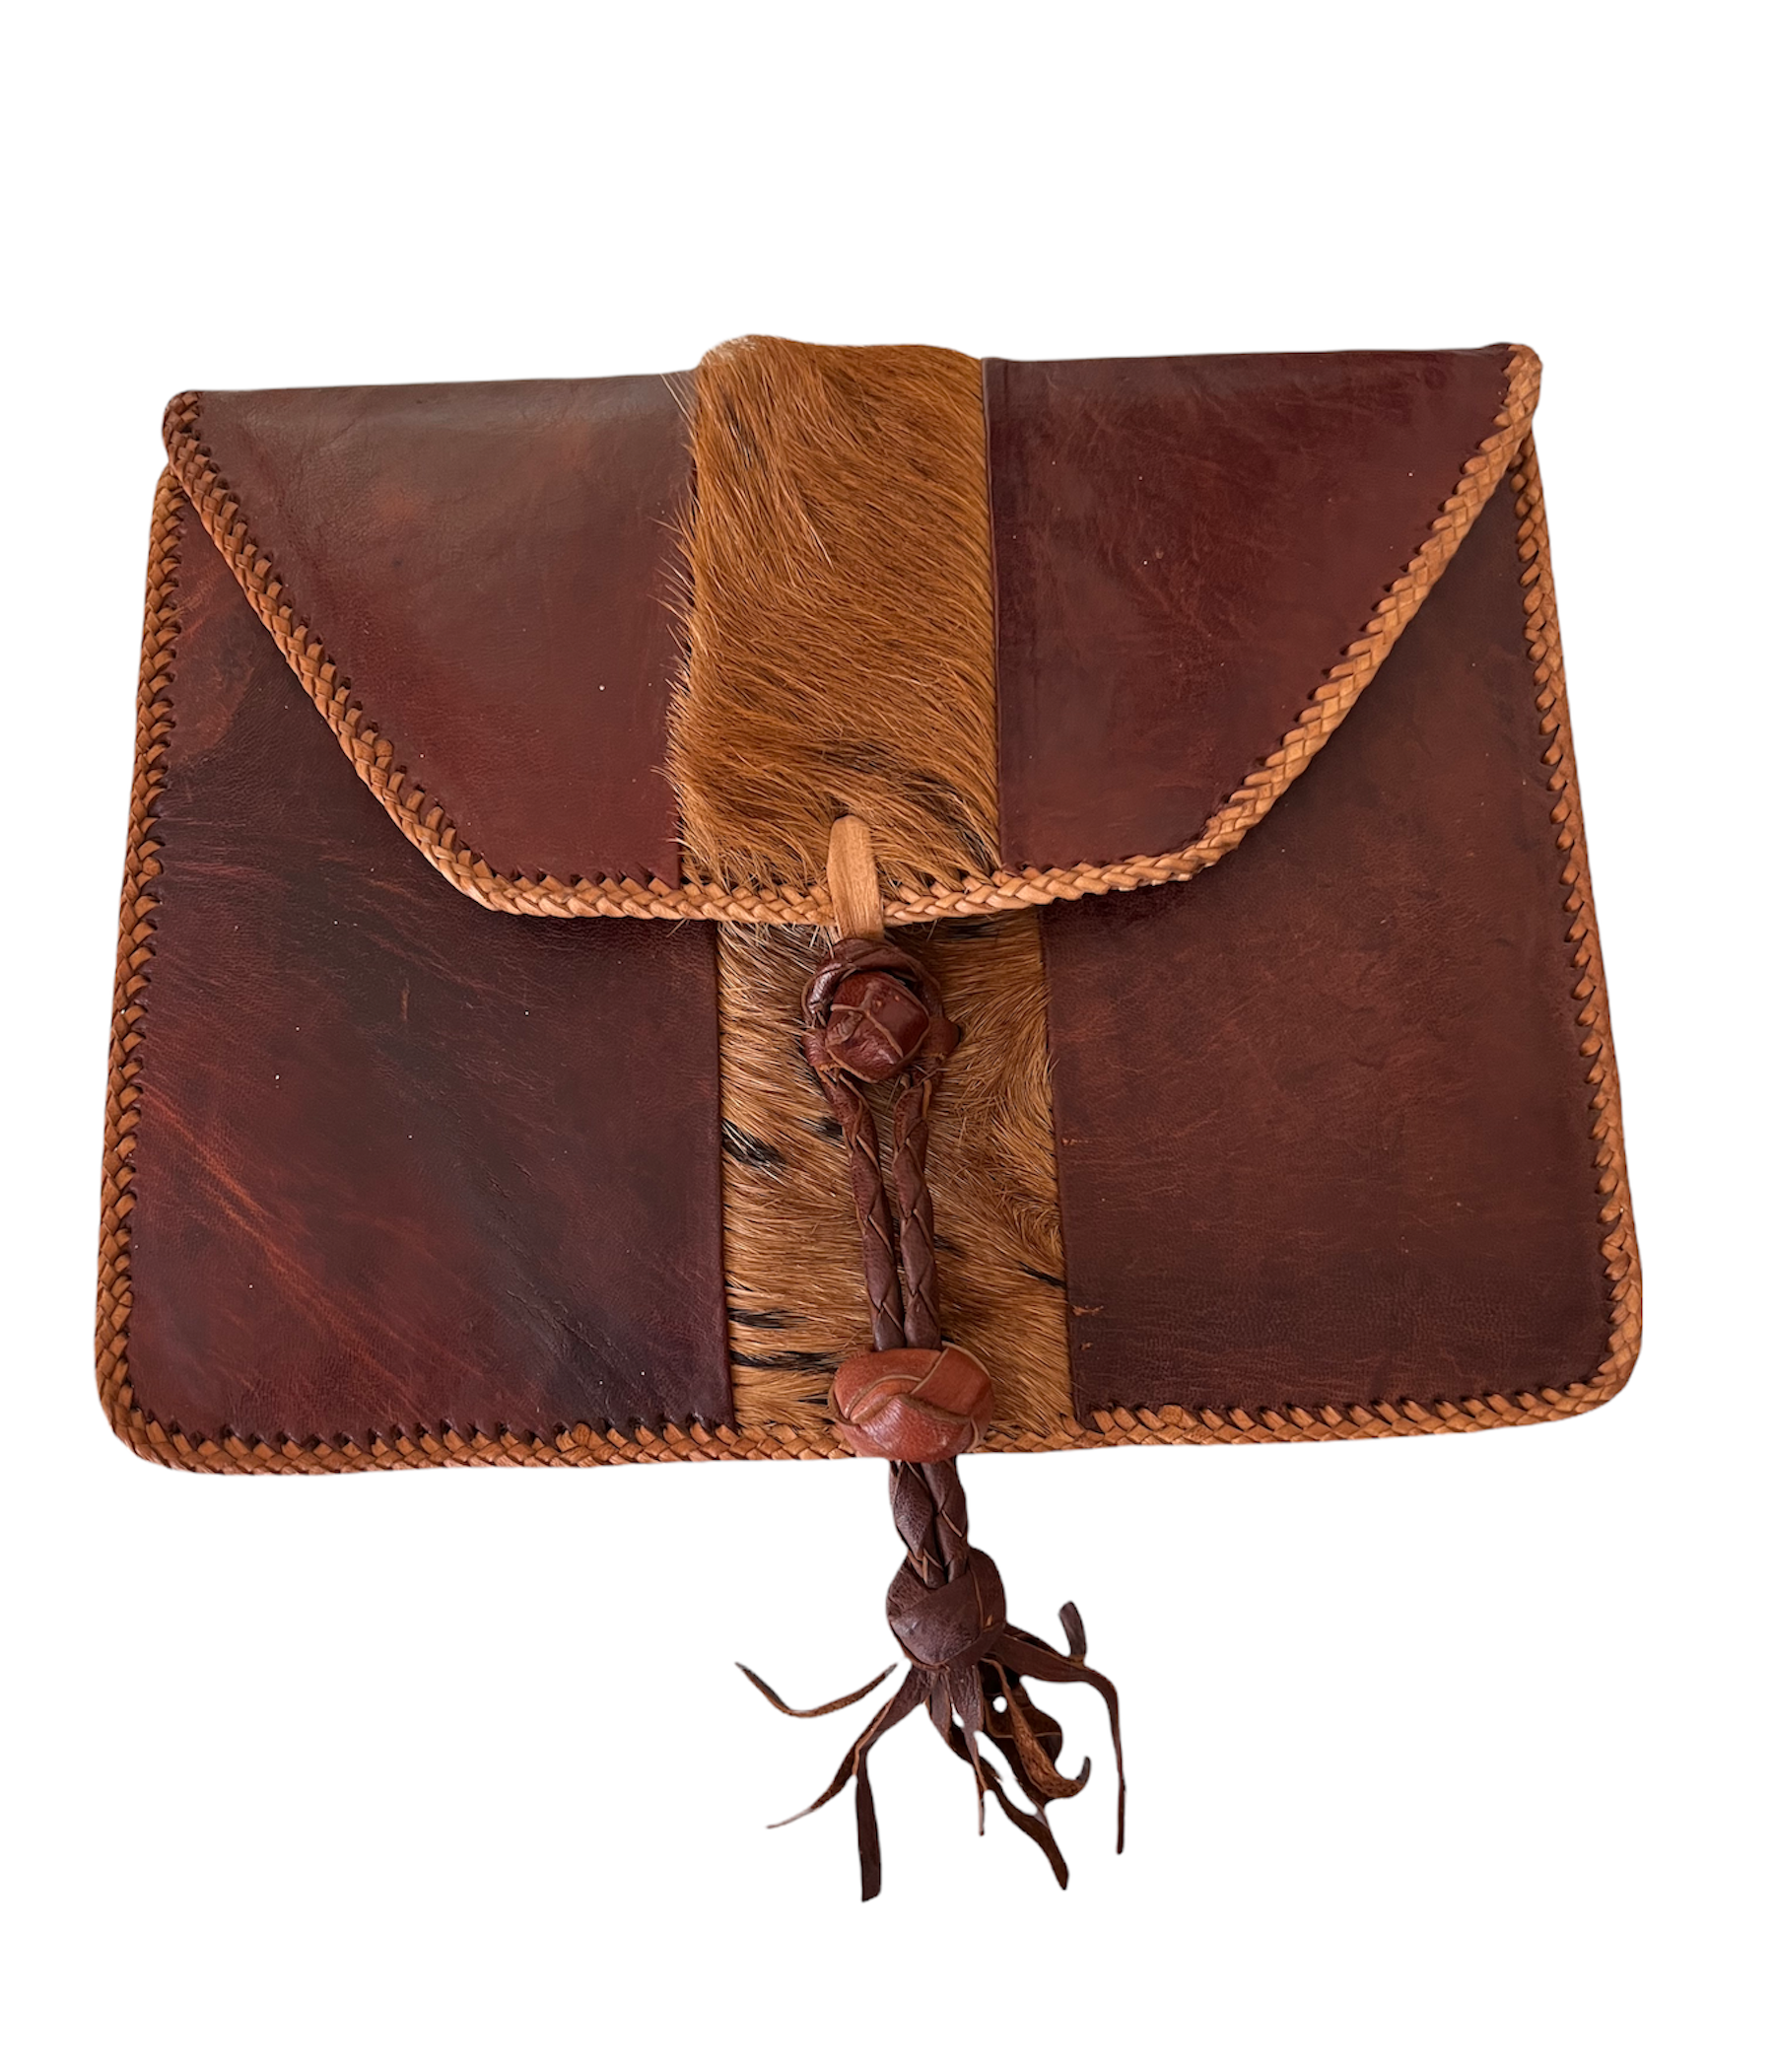 Camel Leather Bag With Exposed Fur